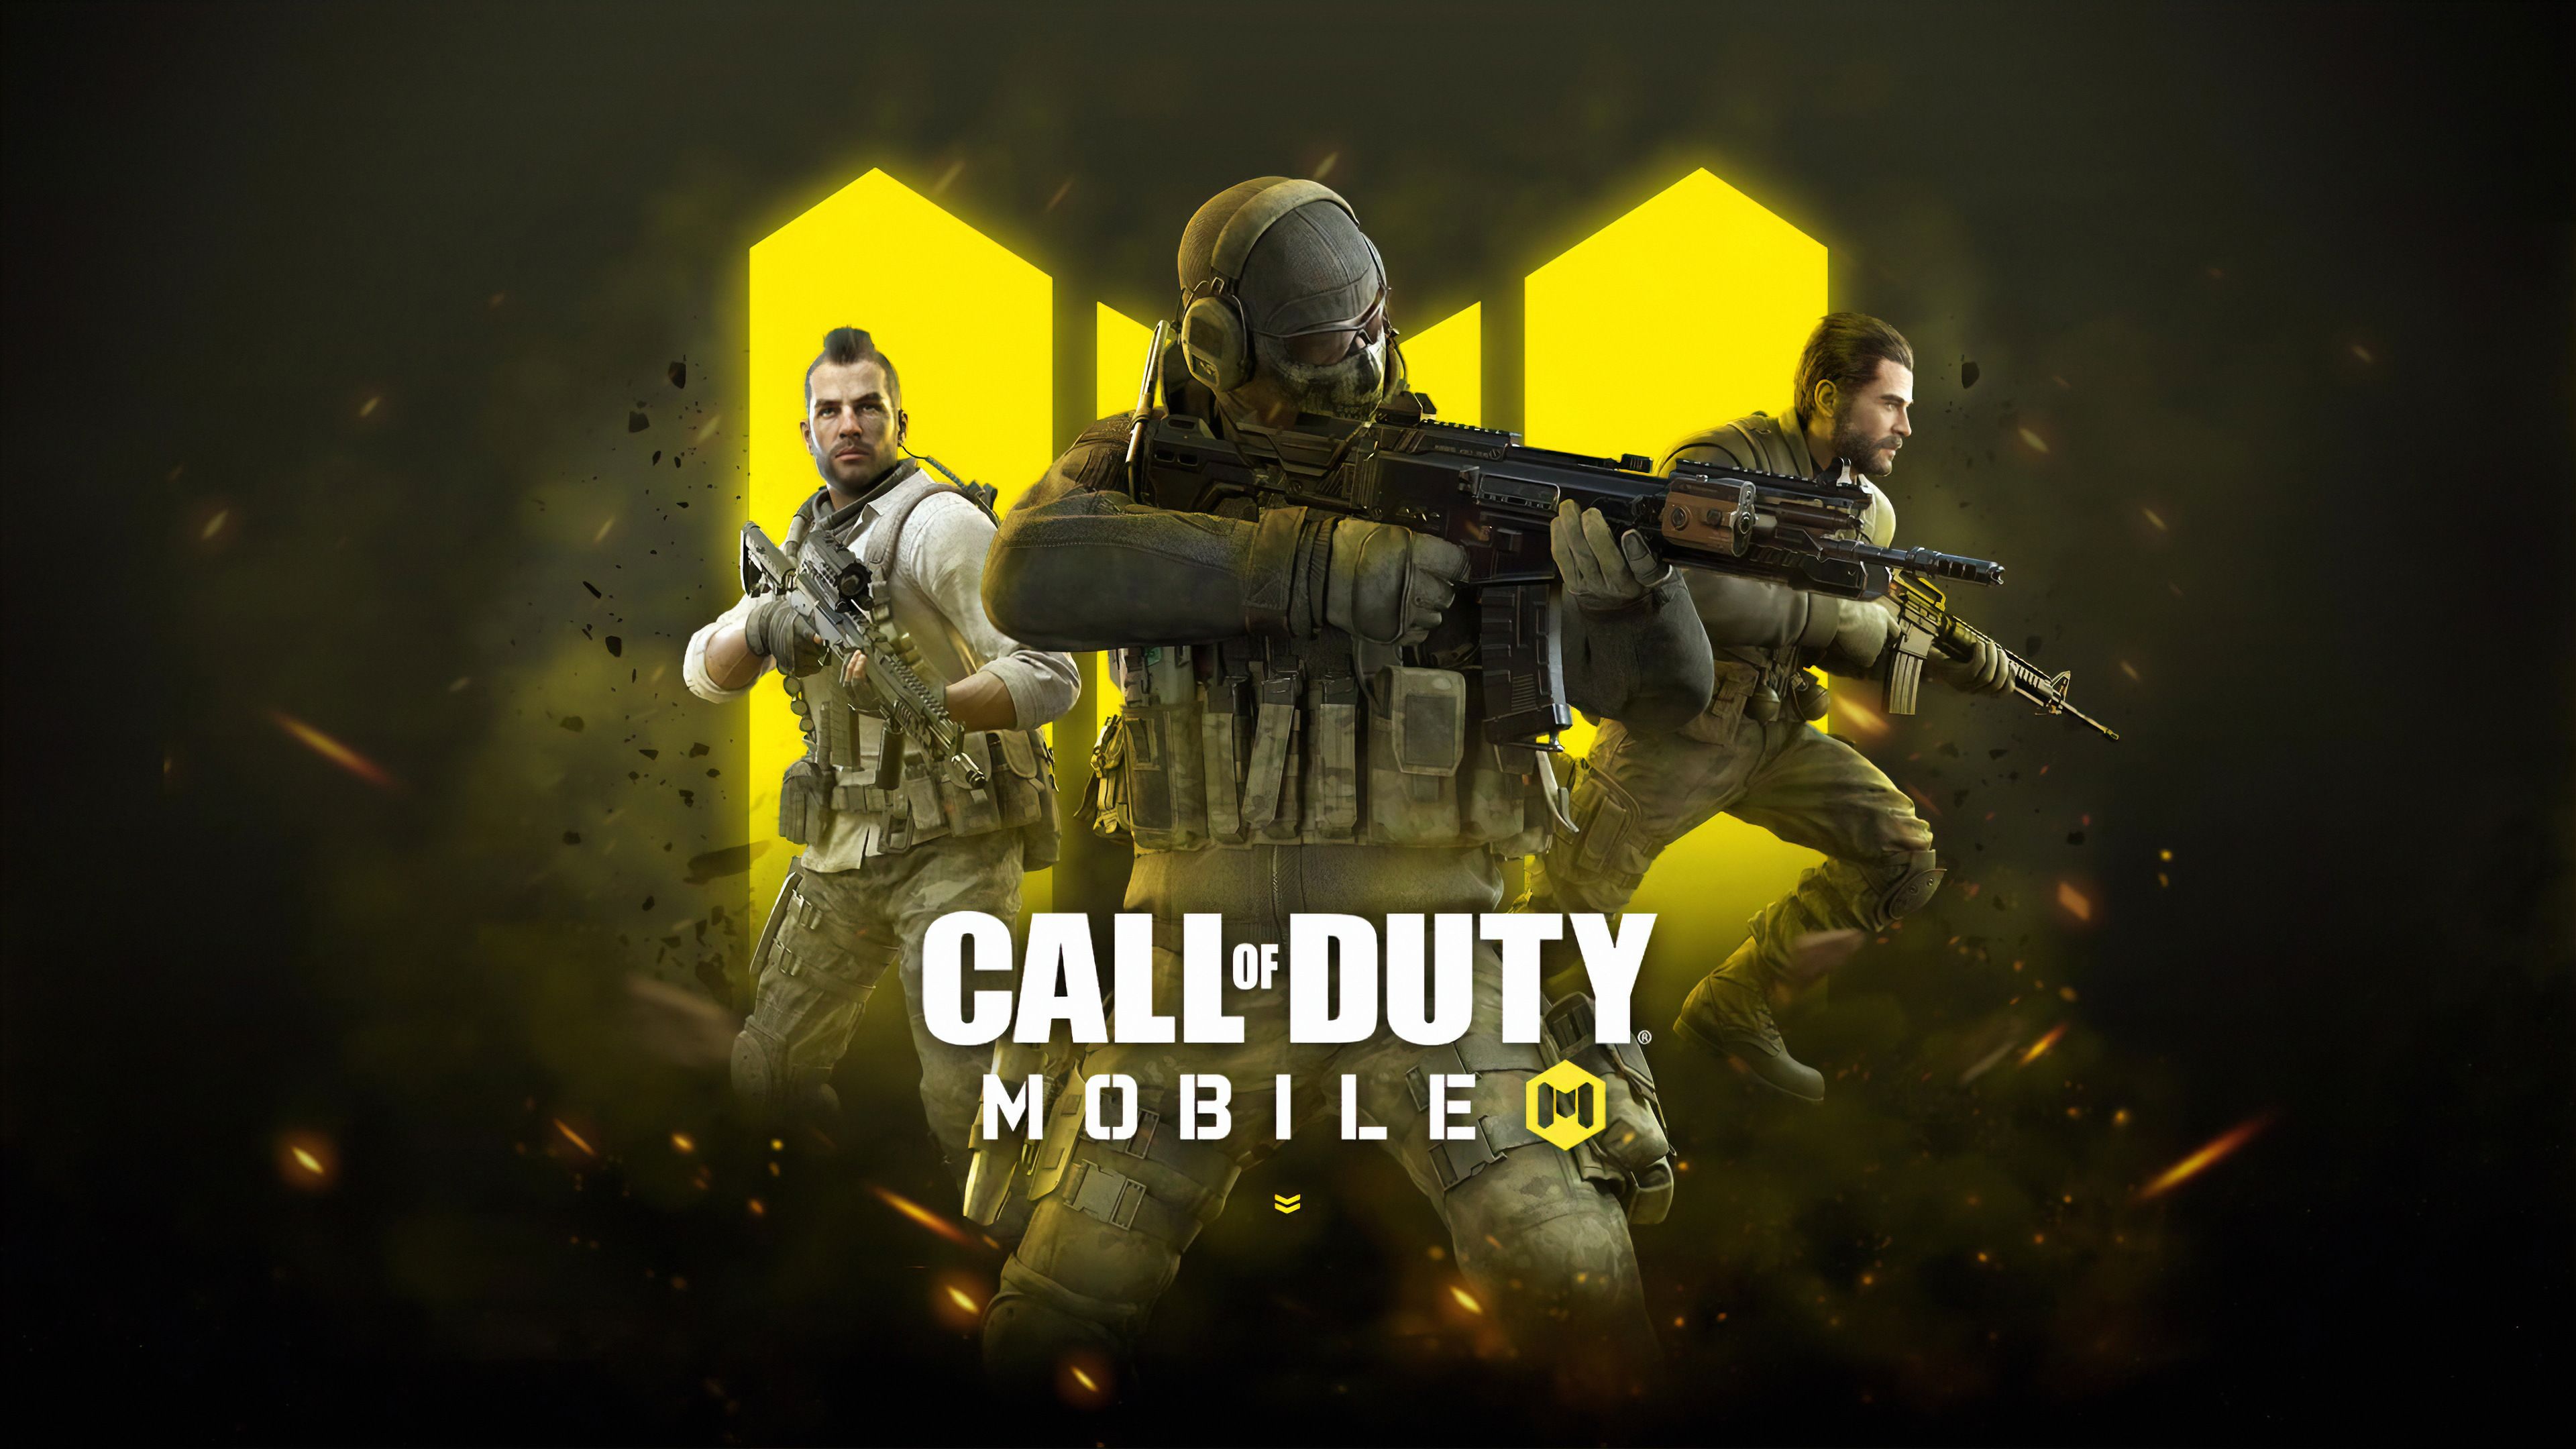 Call of Duty Mobile Logo Wallpaper Free Call of Duty Mobile